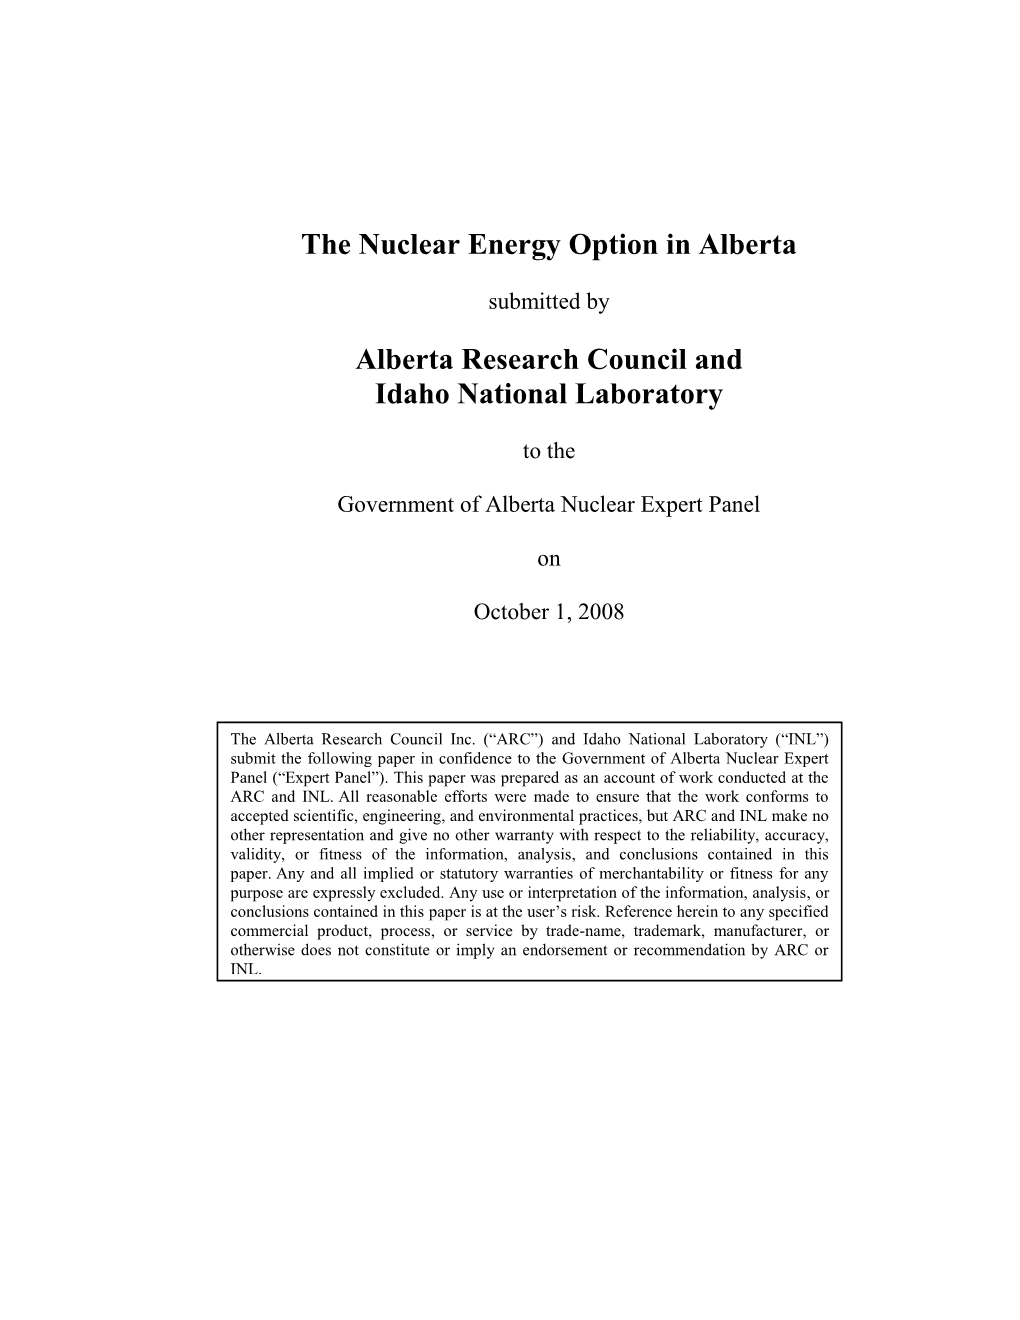 The Nuclear Energy Option in Alberta